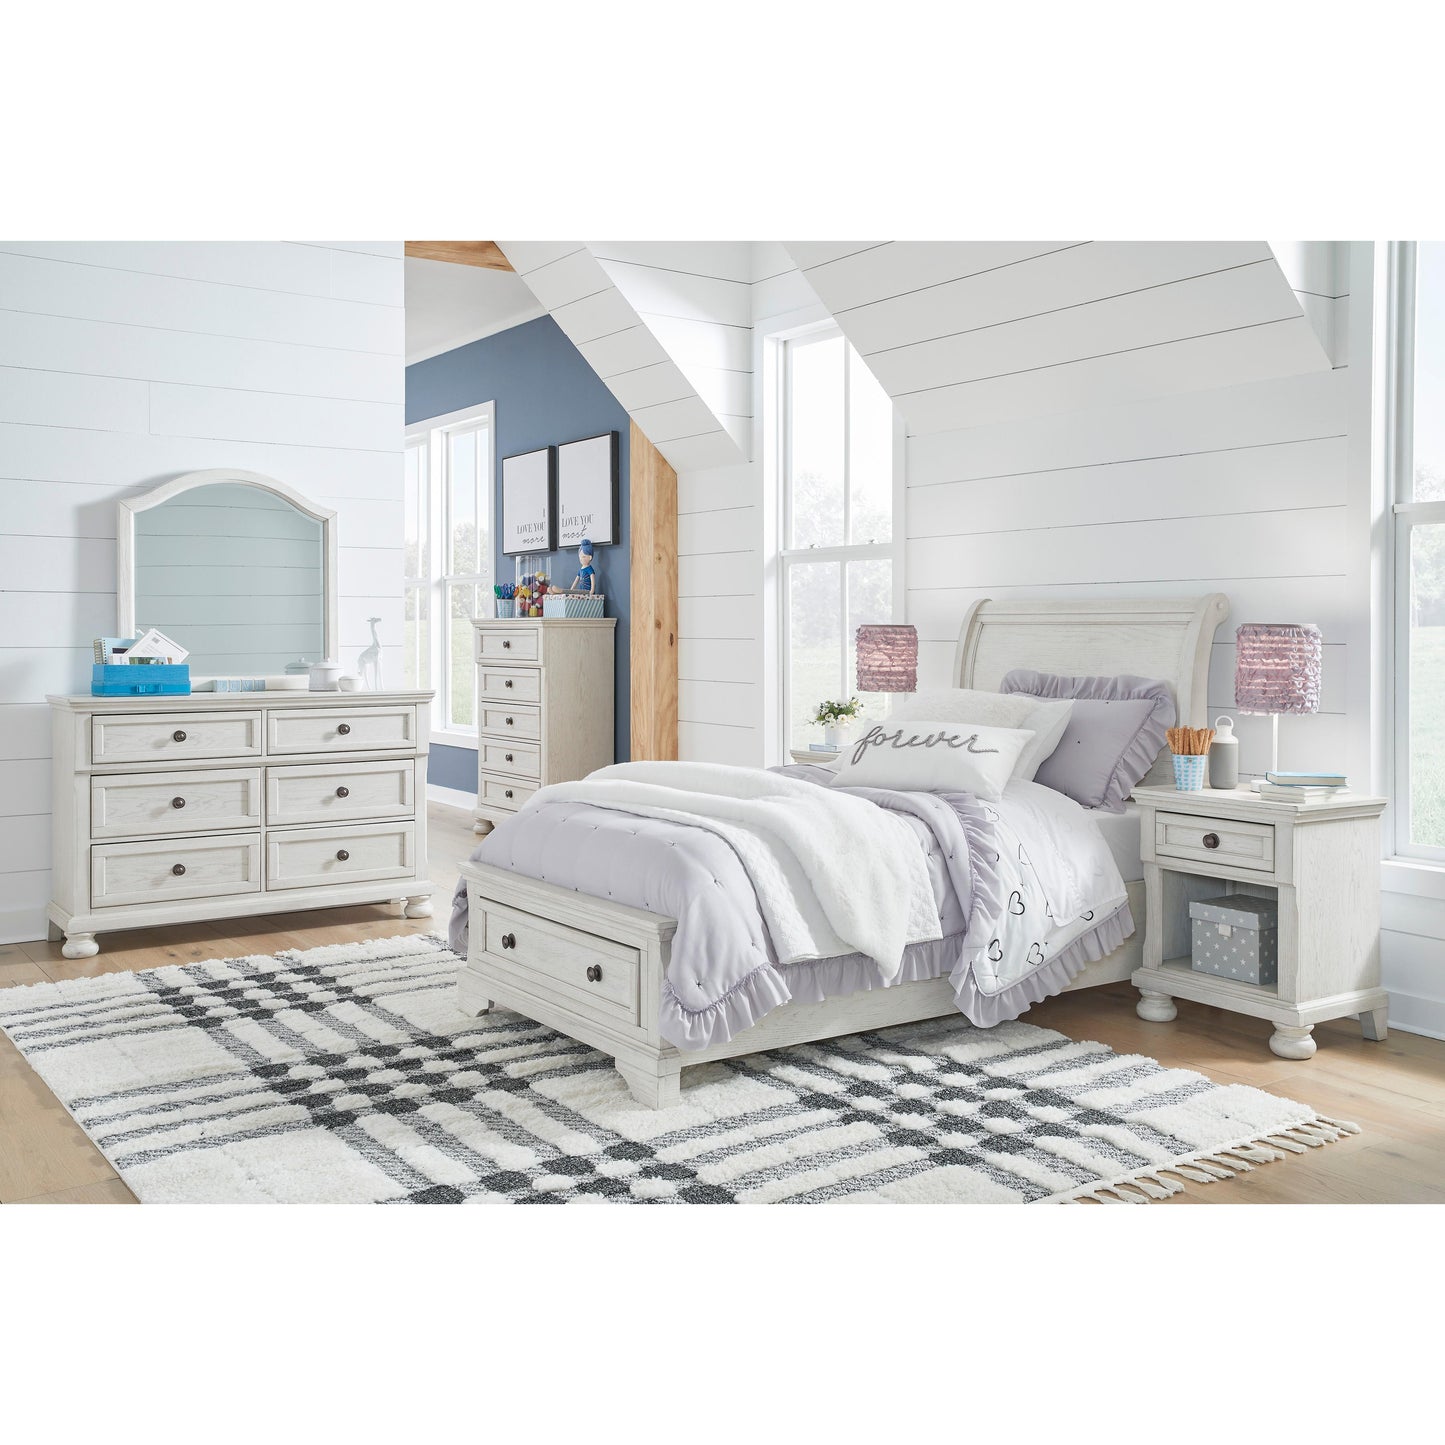 Signature Design by Ashley Kids Beds Bed B742-53/B742-52S/B742-183 IMAGE 9